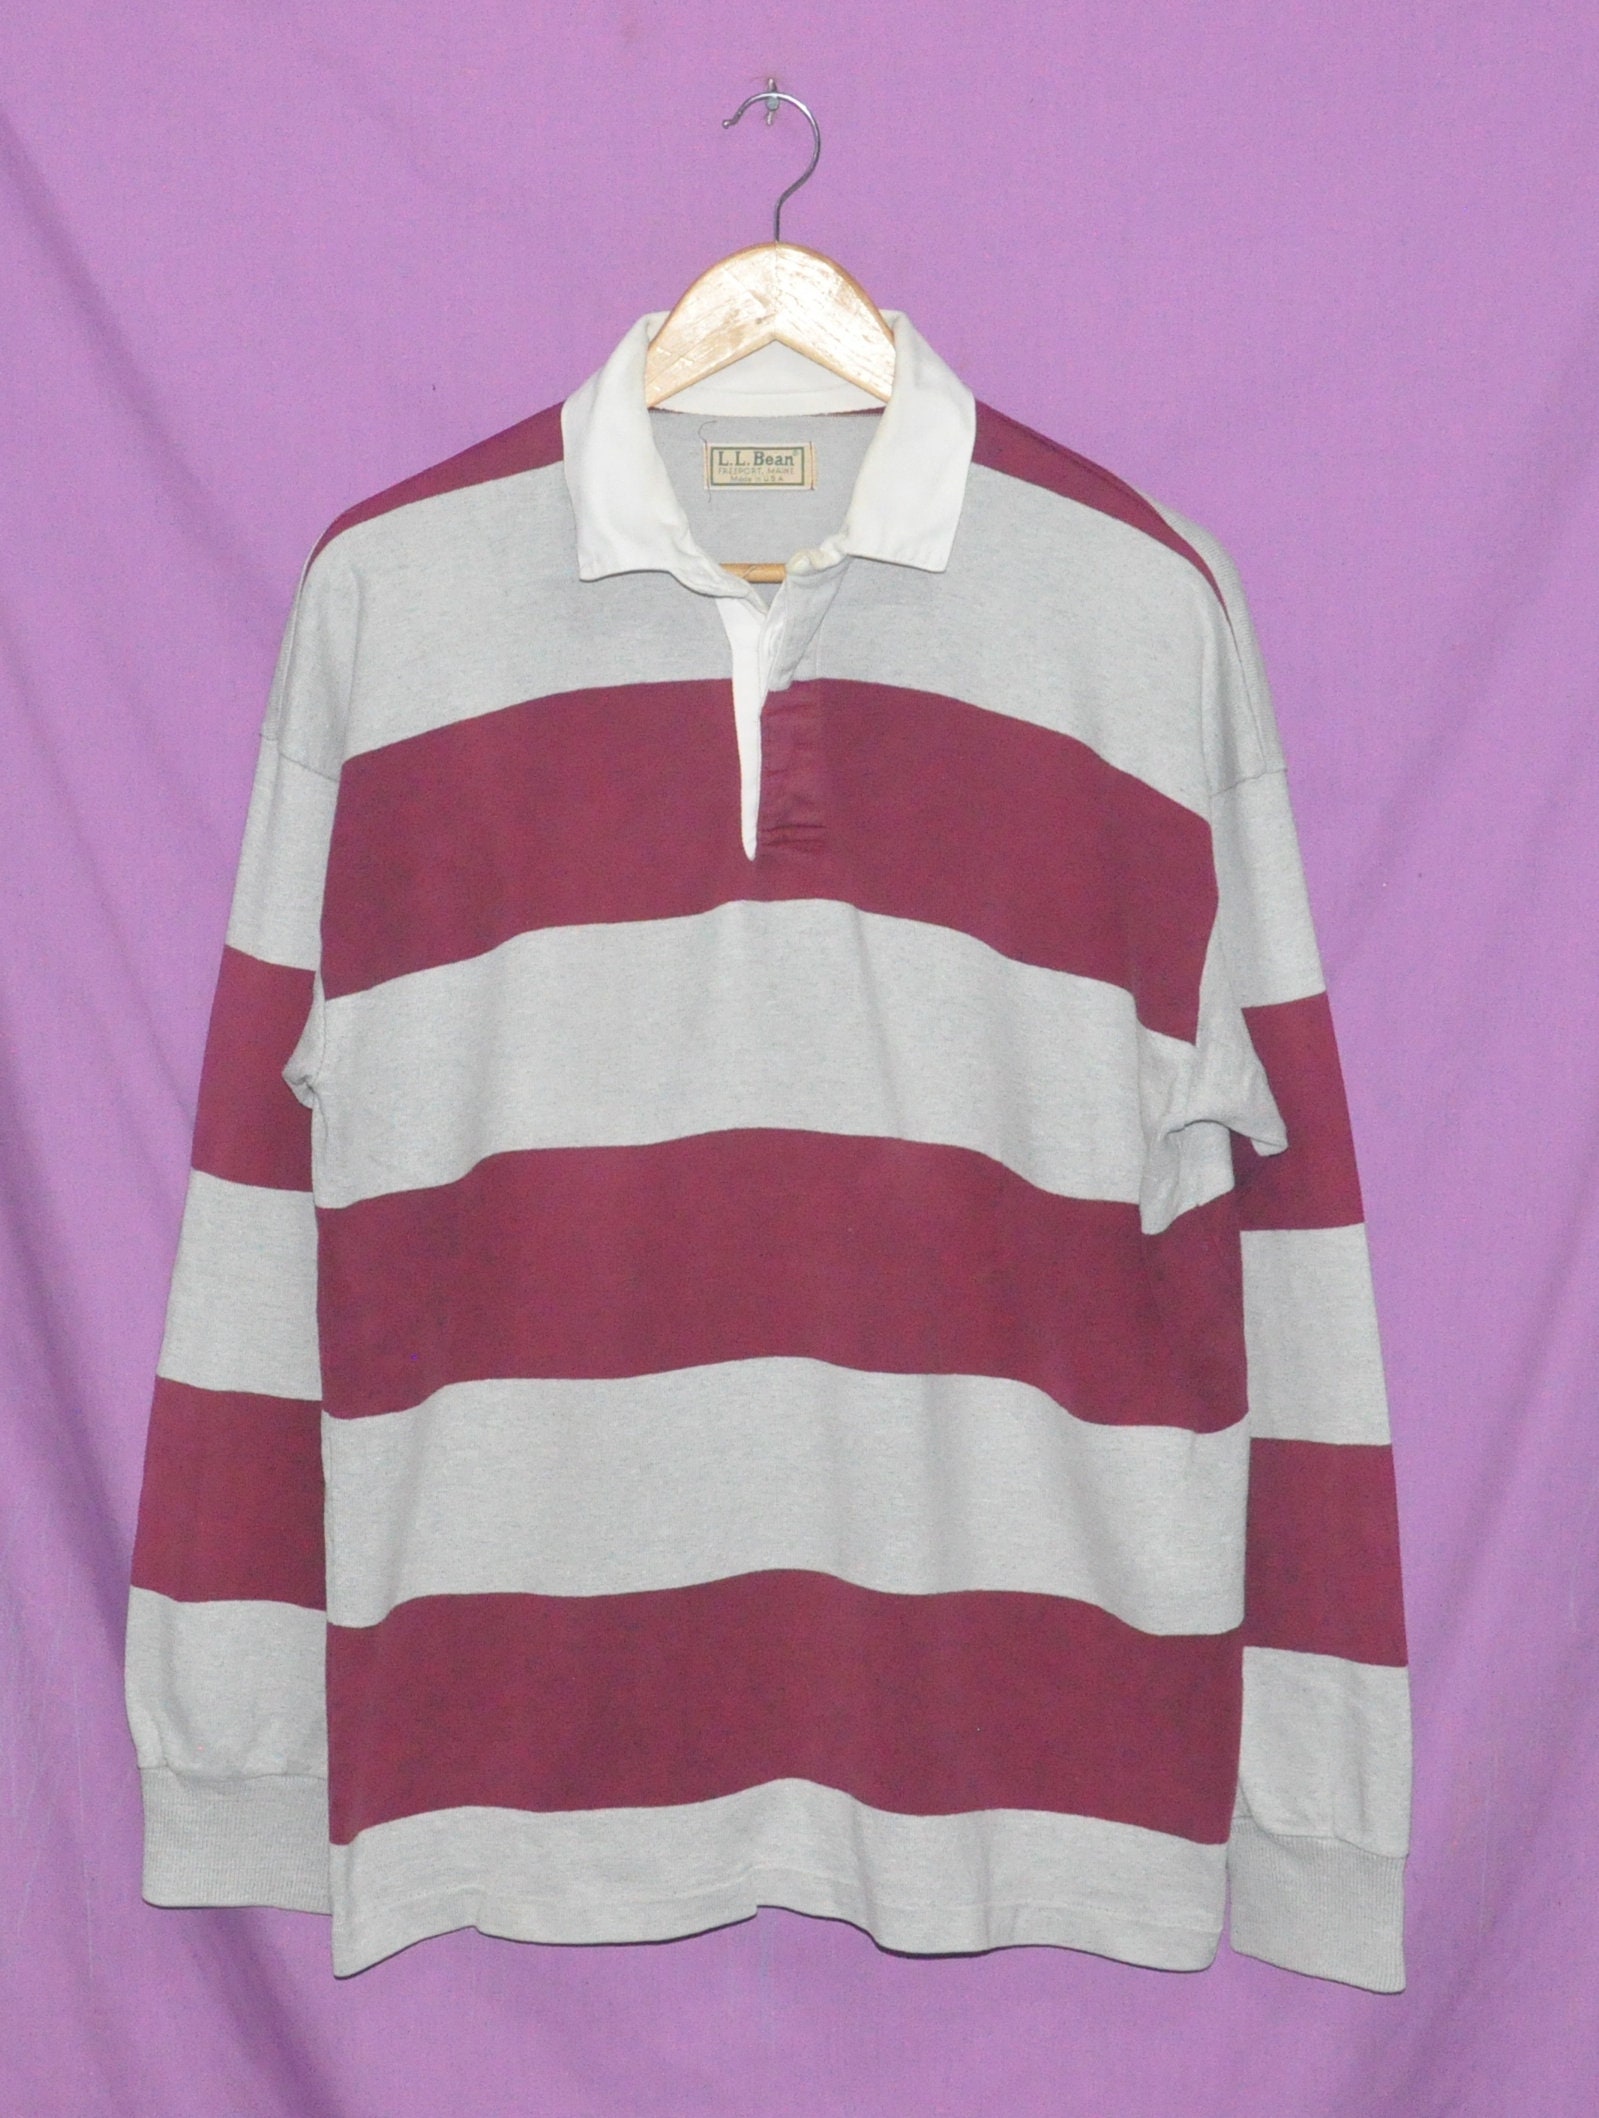 Vintage 90s LL Bean Striped Rugby Polo-Shirt Made in USA | Etsy